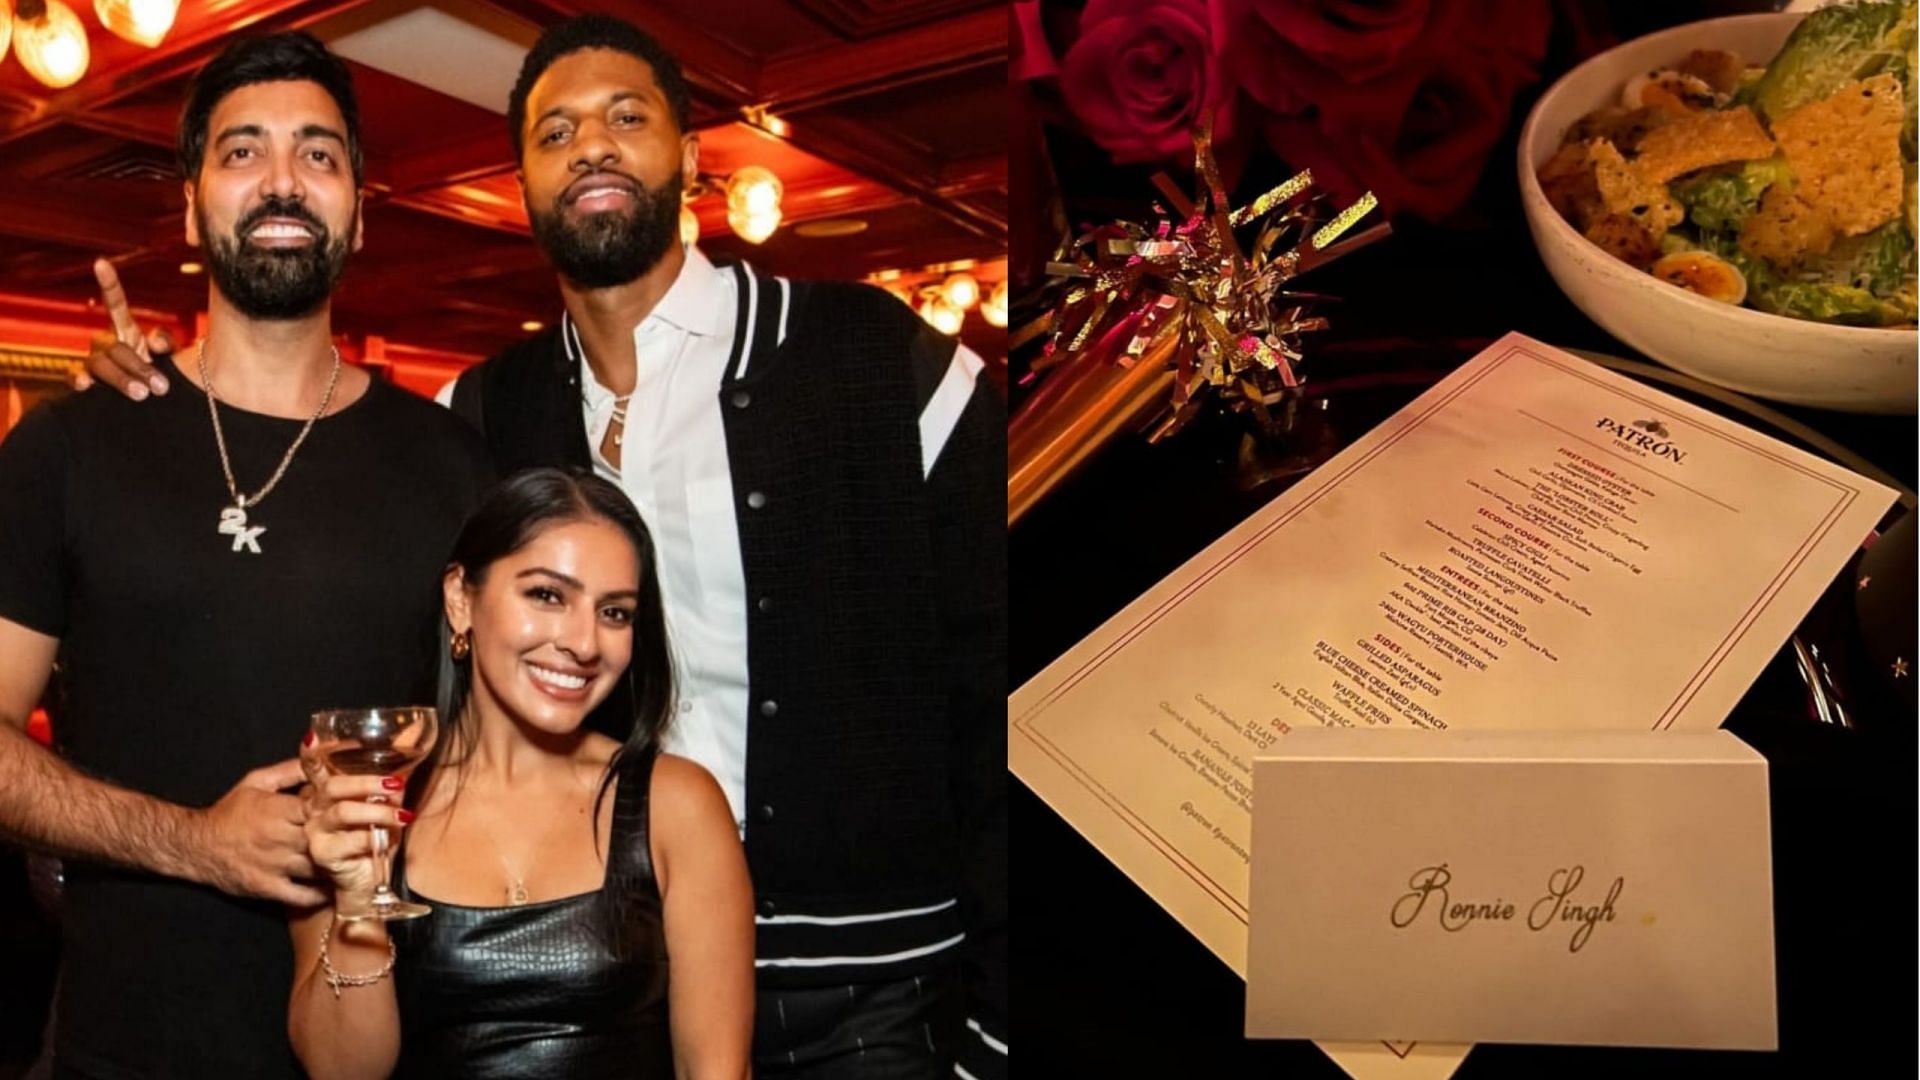 Ronnie Singh (2K) &amp; Paul George ring in the New Year with style: Luxury Dinner and $510 Patron Tequila bar celebration